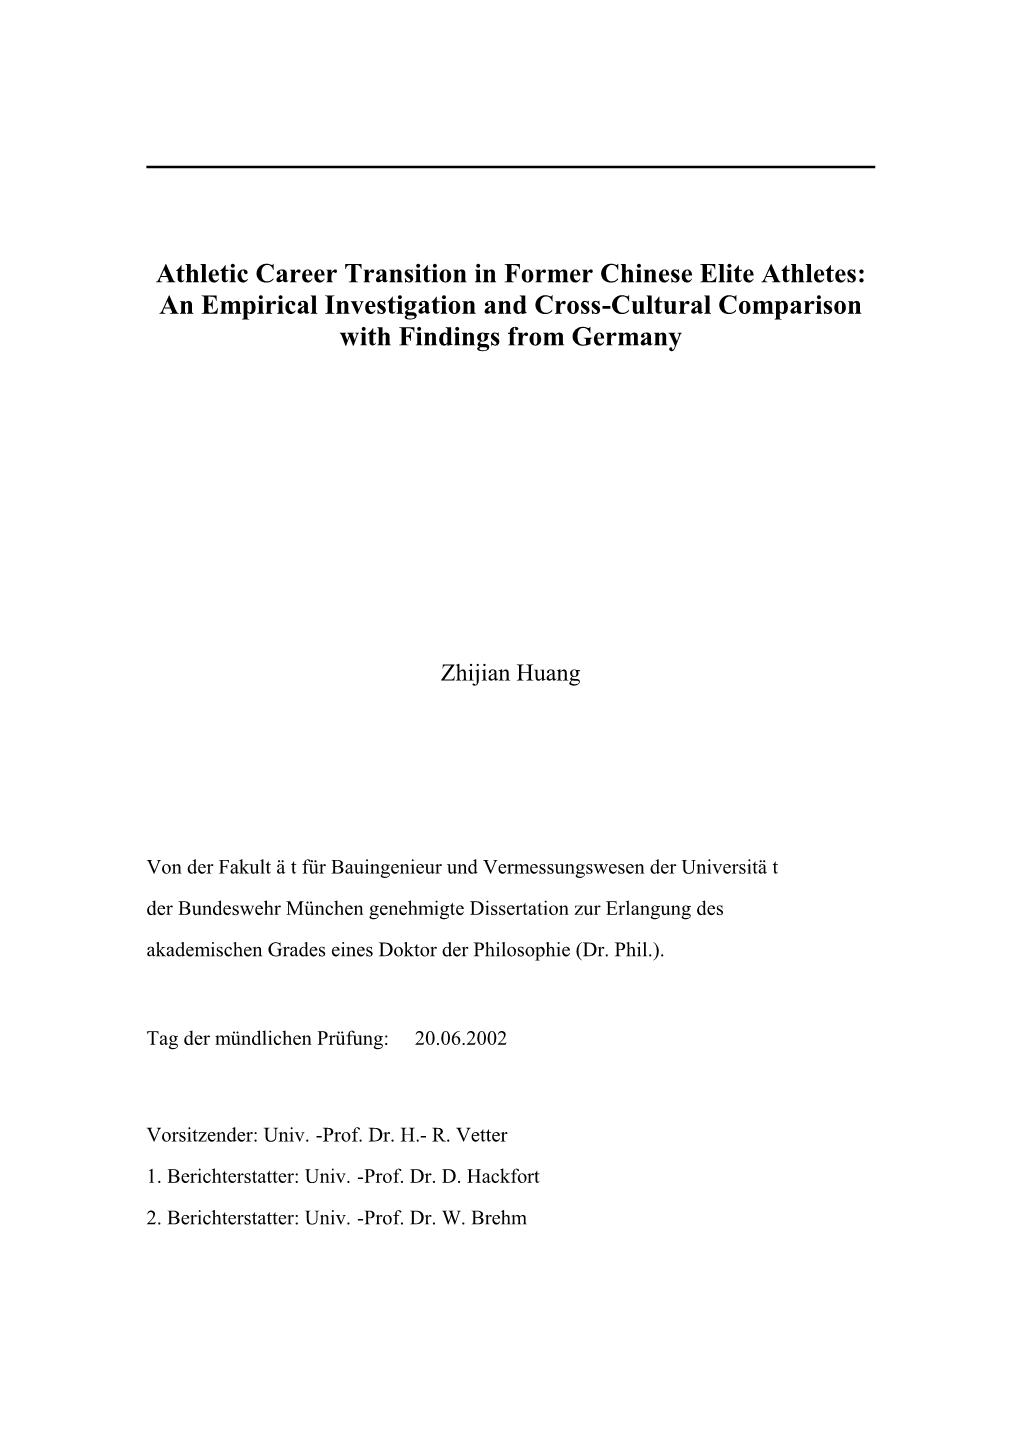 Athletic Career Transition in Former Chinese Elite Athletes: an Empirical Investigation and Cross-Cultural Comparison with Findings from Germany